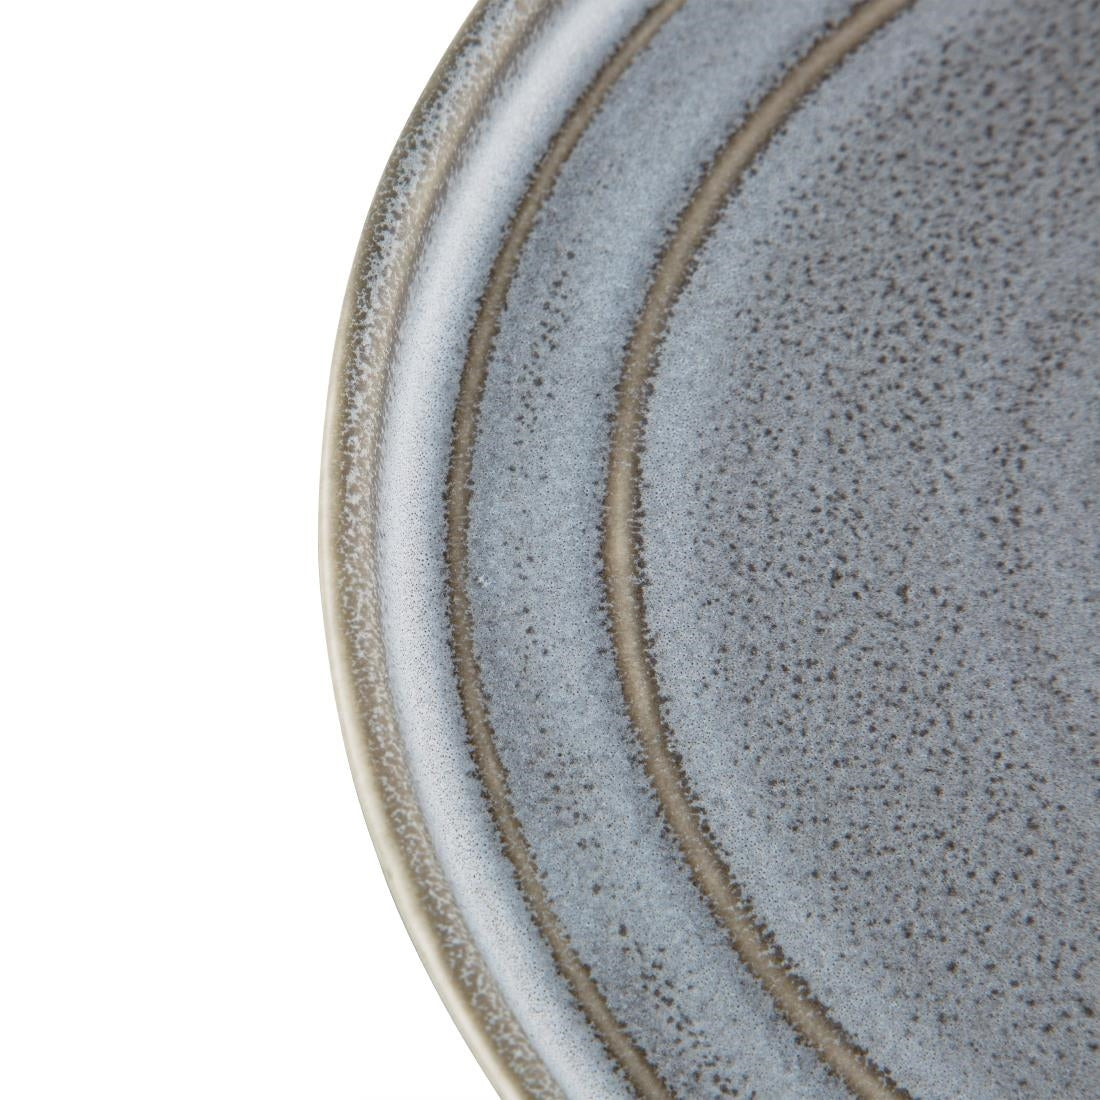 FD921 Olympia Cavolo Charcoal Dusk Flat Round Plates 220mm (Pack of 6) JD Catering Equipment Solutions Ltd